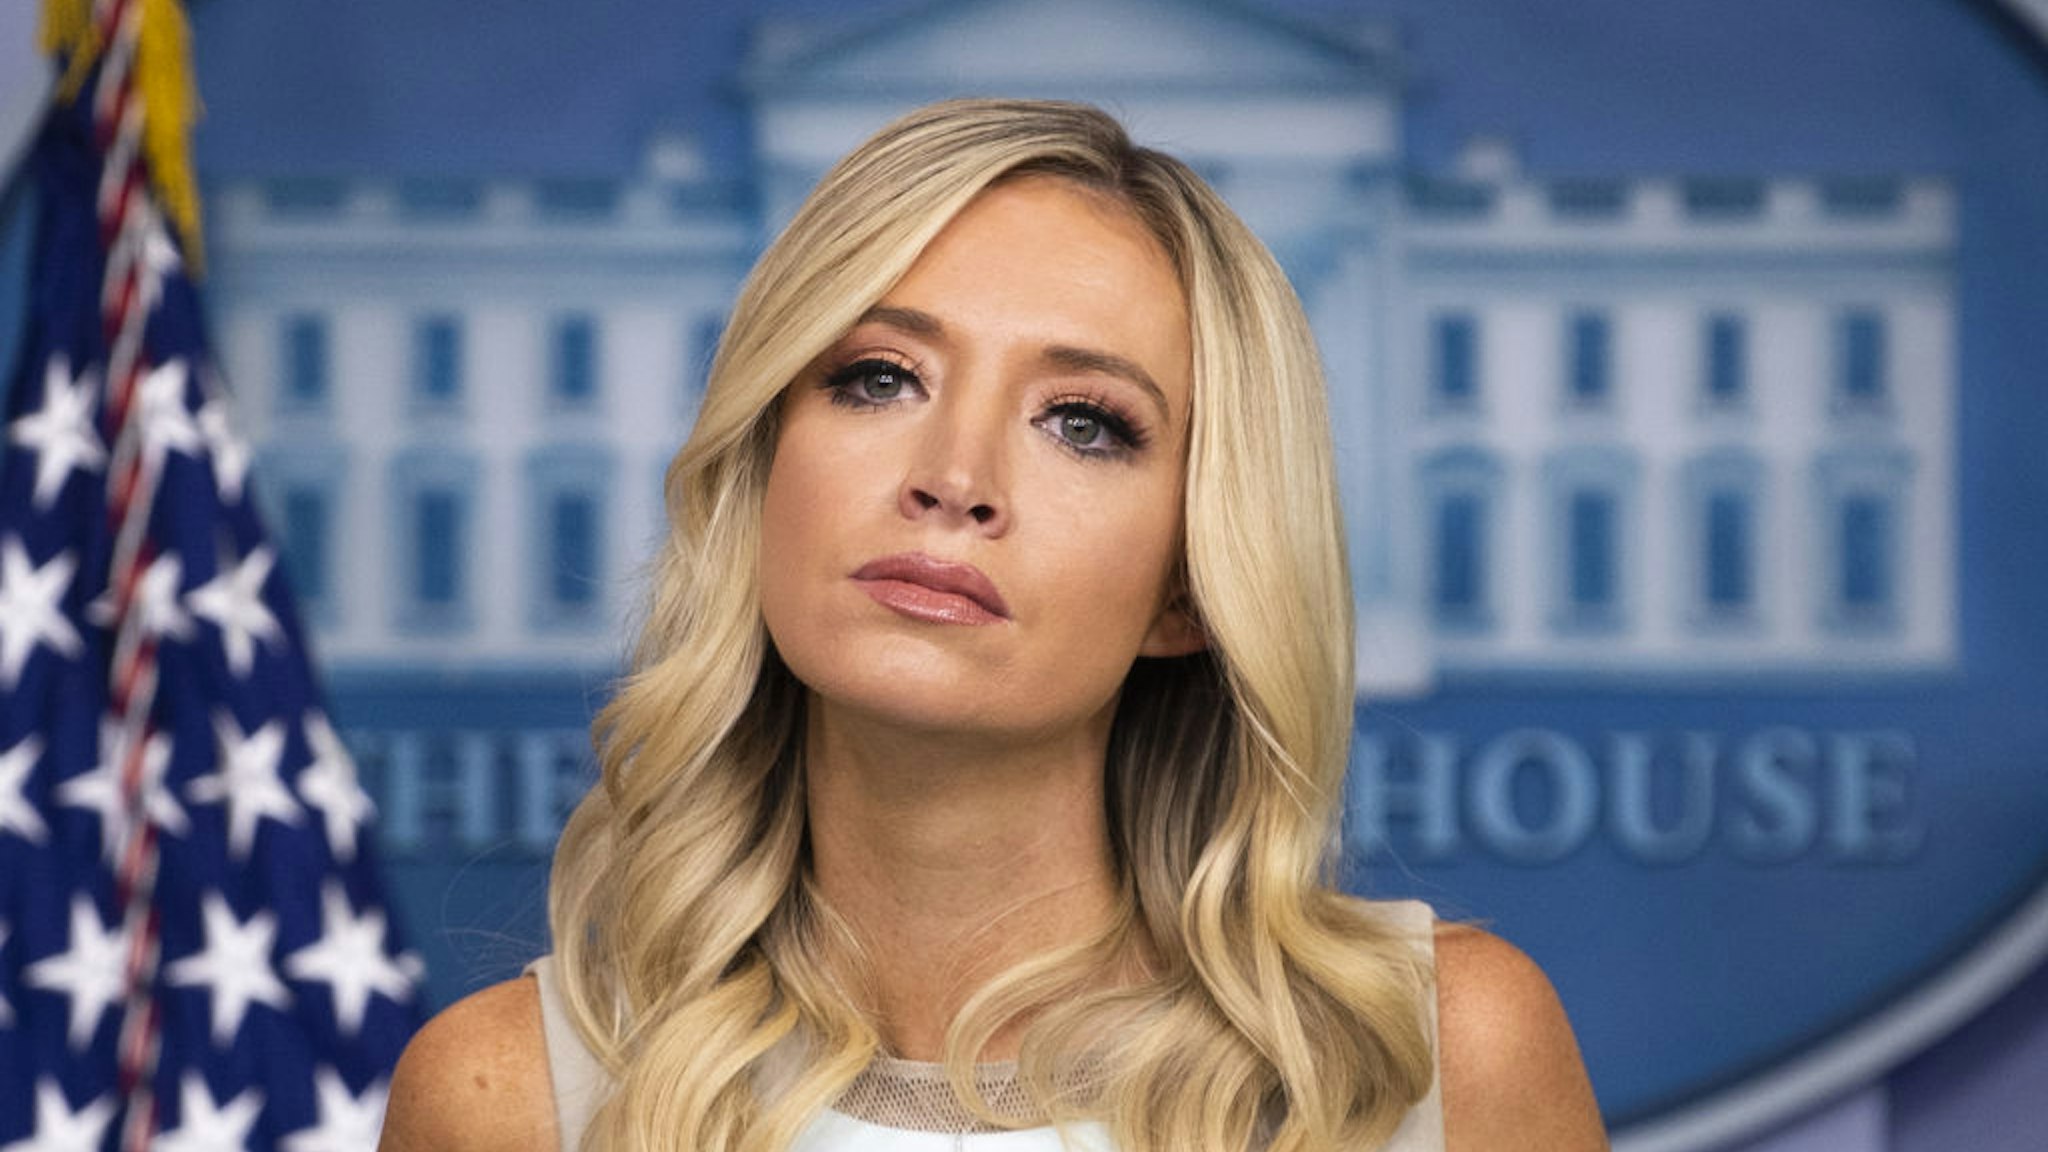 Kayleigh McEnany, White House press secretary, pauses while speaking during a news conference in the James S. Brady Press Briefing Room at the White House in Washington, D.C., U.S. on Monday, July 6, 2020.